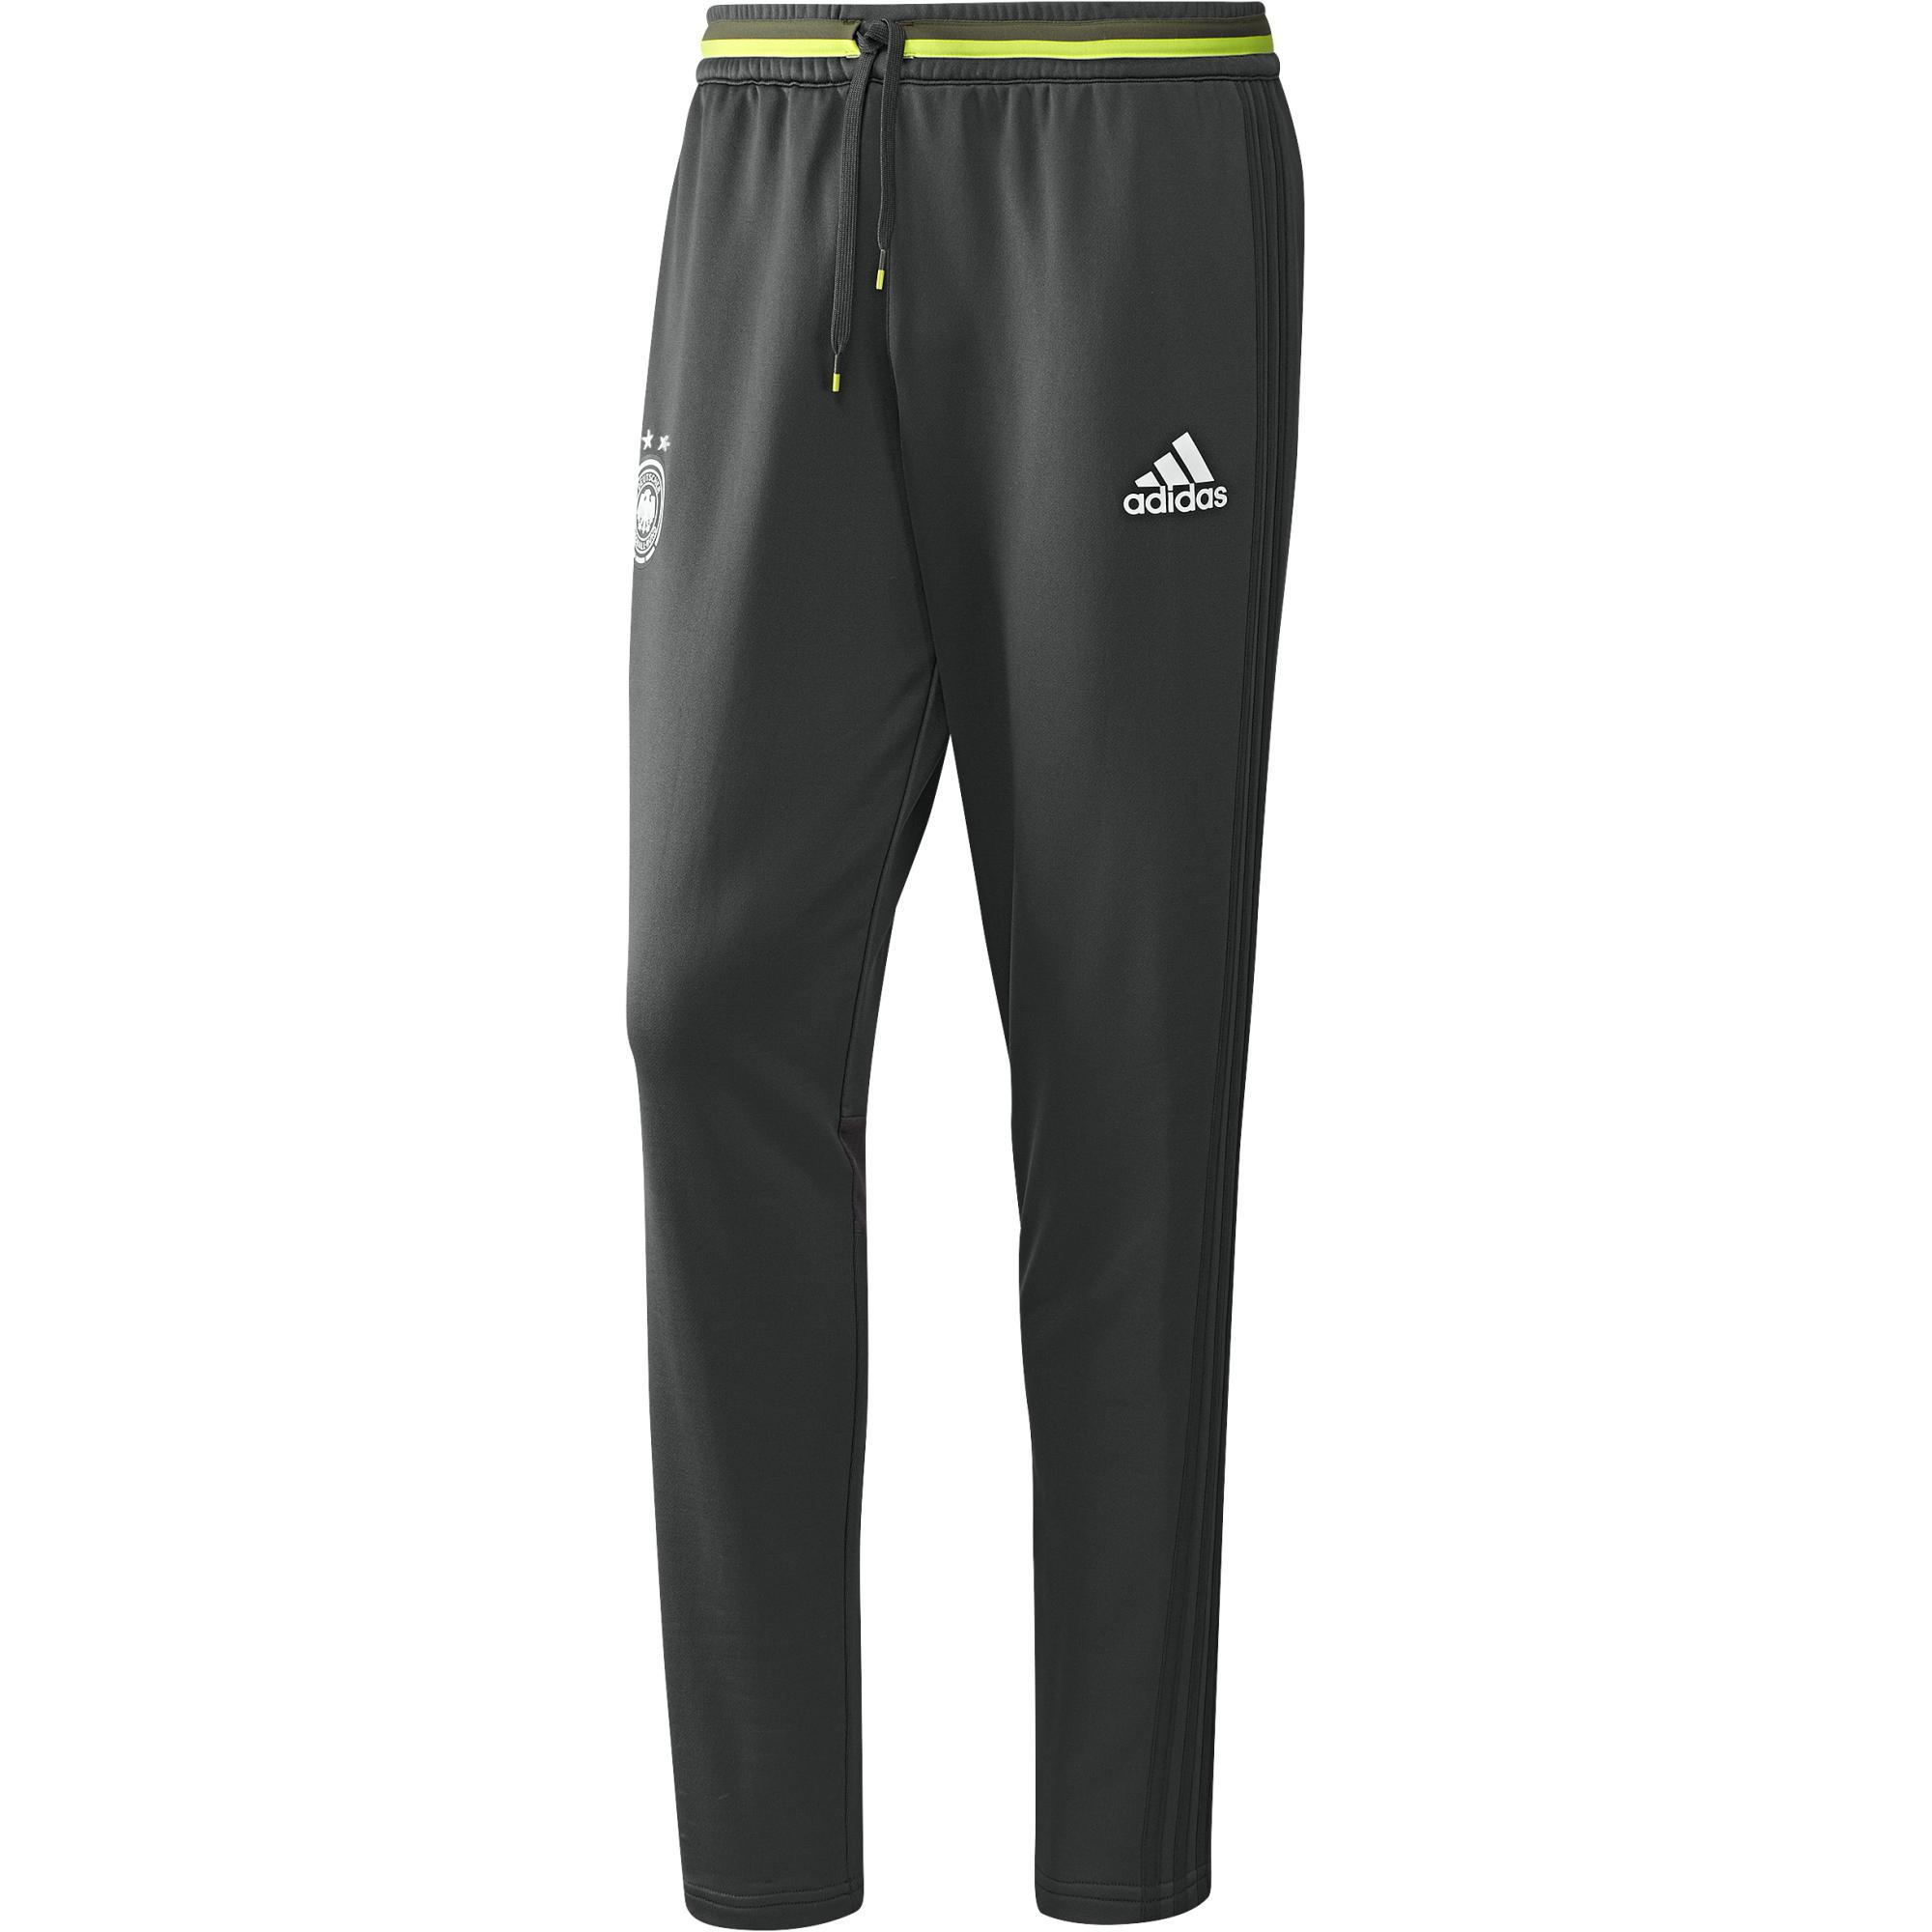 ADIDAS ALLEMAGNE TRG PANT GRIS 2016